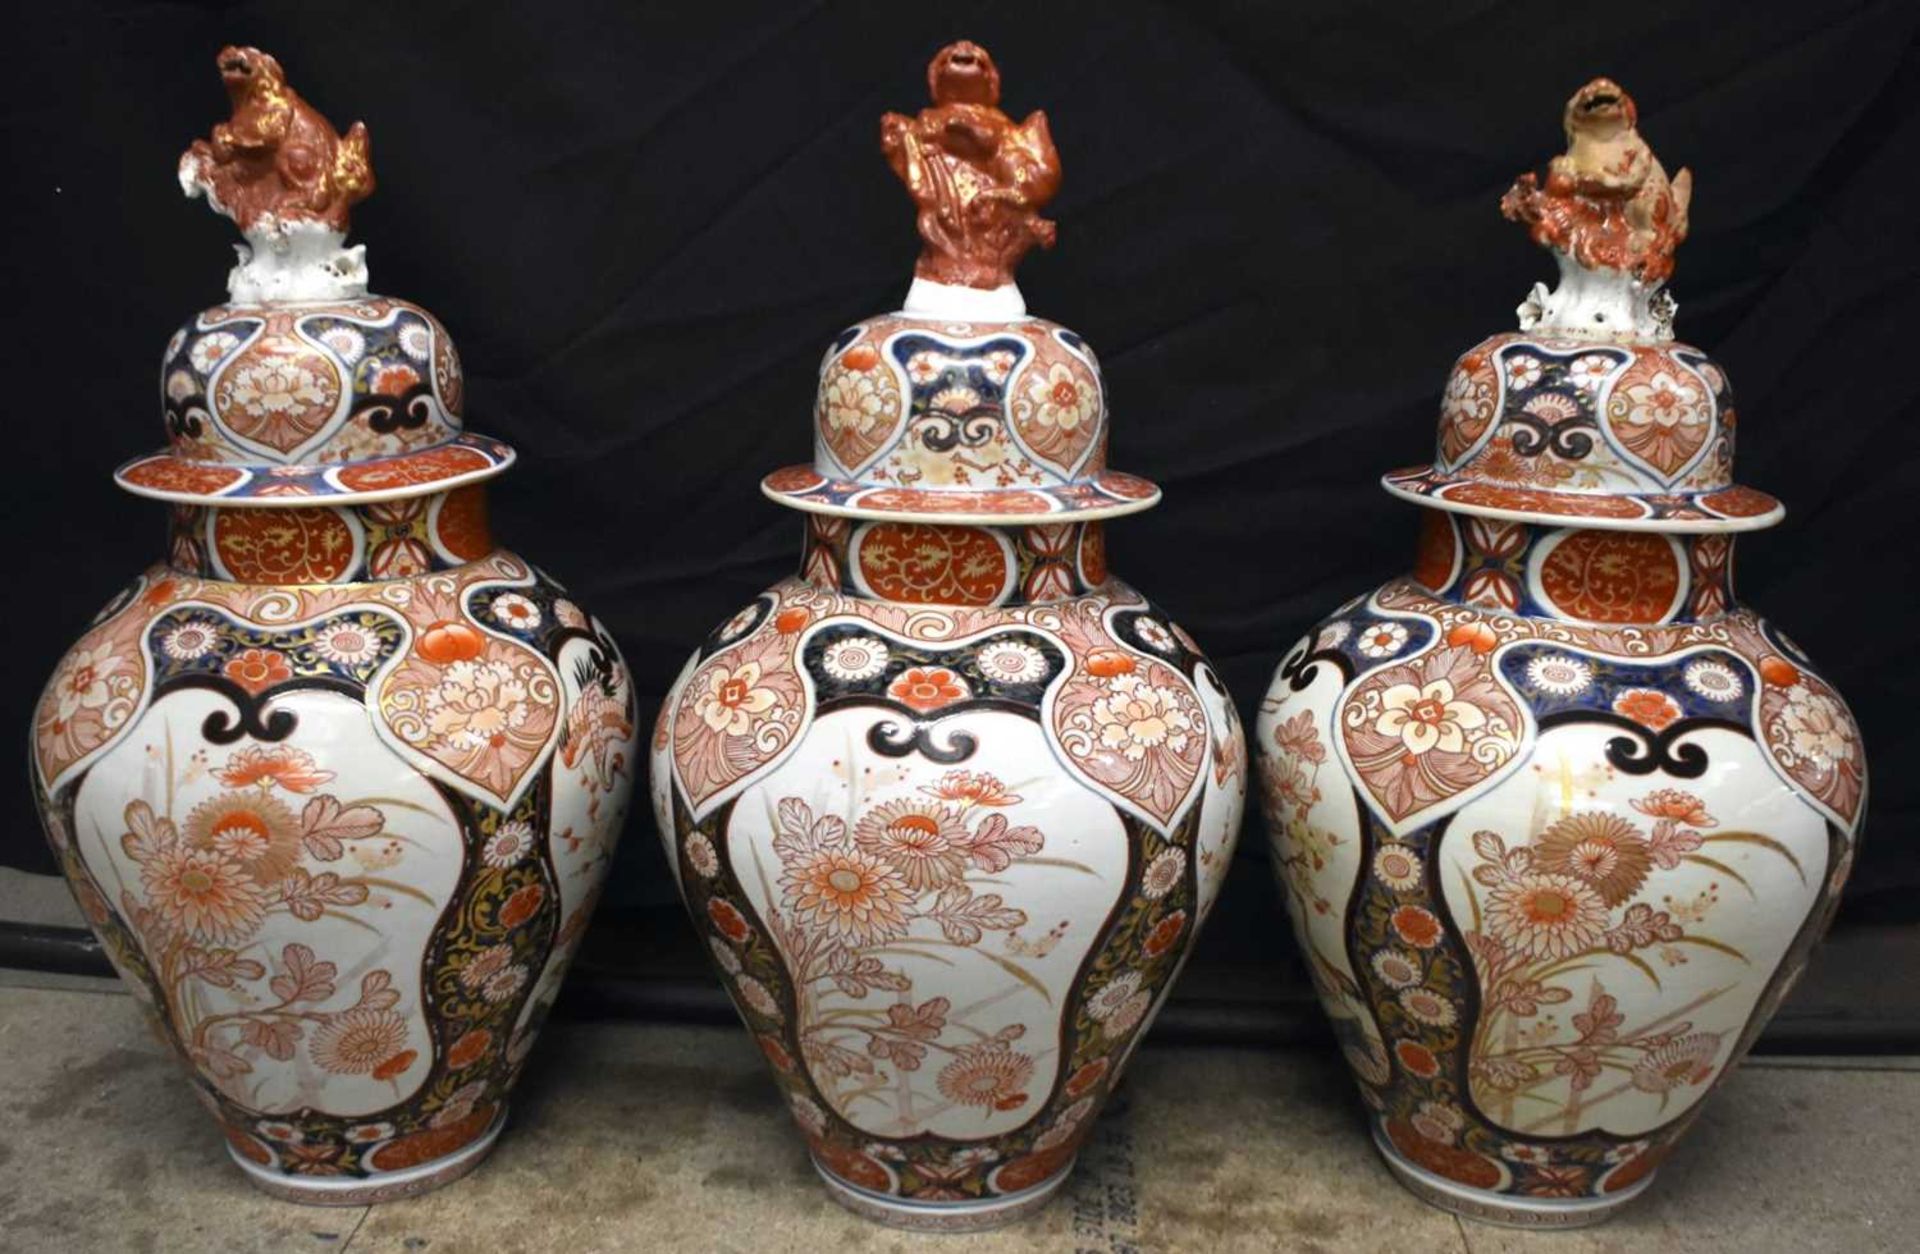 A FINE SET OF VERY LARGE 18TH CENTURY JAPANESE EDO PERIOD IMARI VASES AND COVERS painted with panels - Image 19 of 22